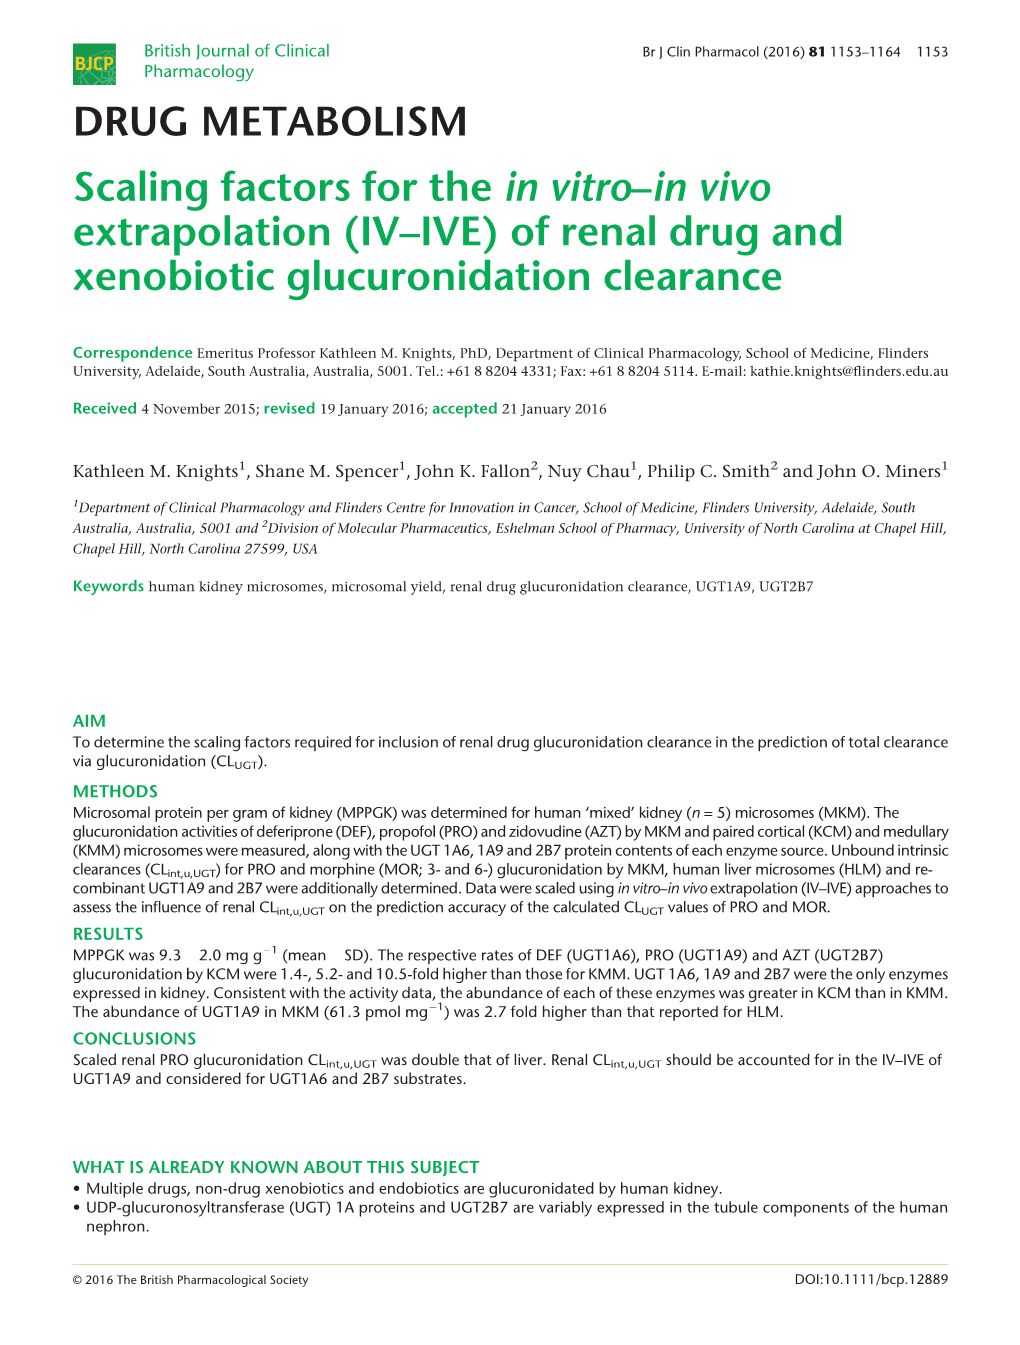 Scaling Factors for the in Vitro–In Vivo Extrapolation (IV–IVE) of Renal Drug and Xenobiotic Glucuronidation Clearance